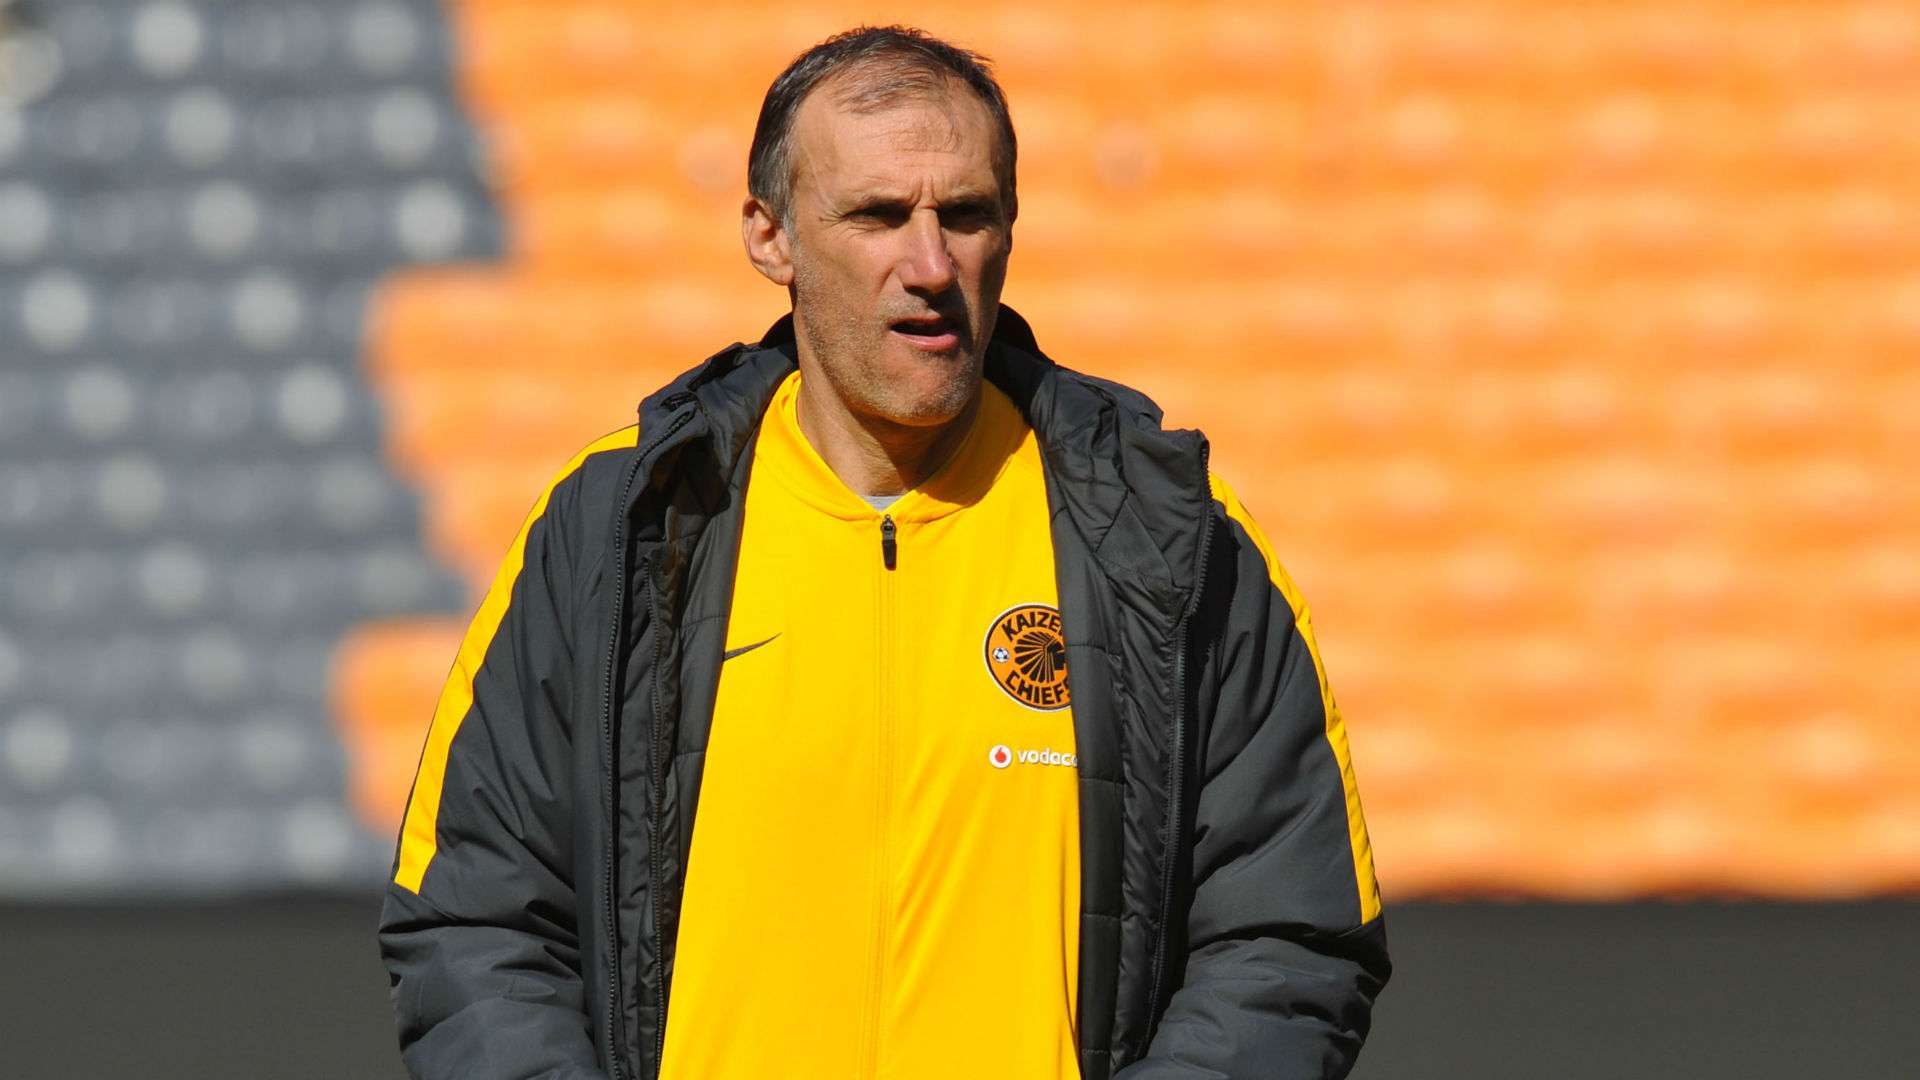 Giovanni Solinas, Kaizer Chiefs, July 2018